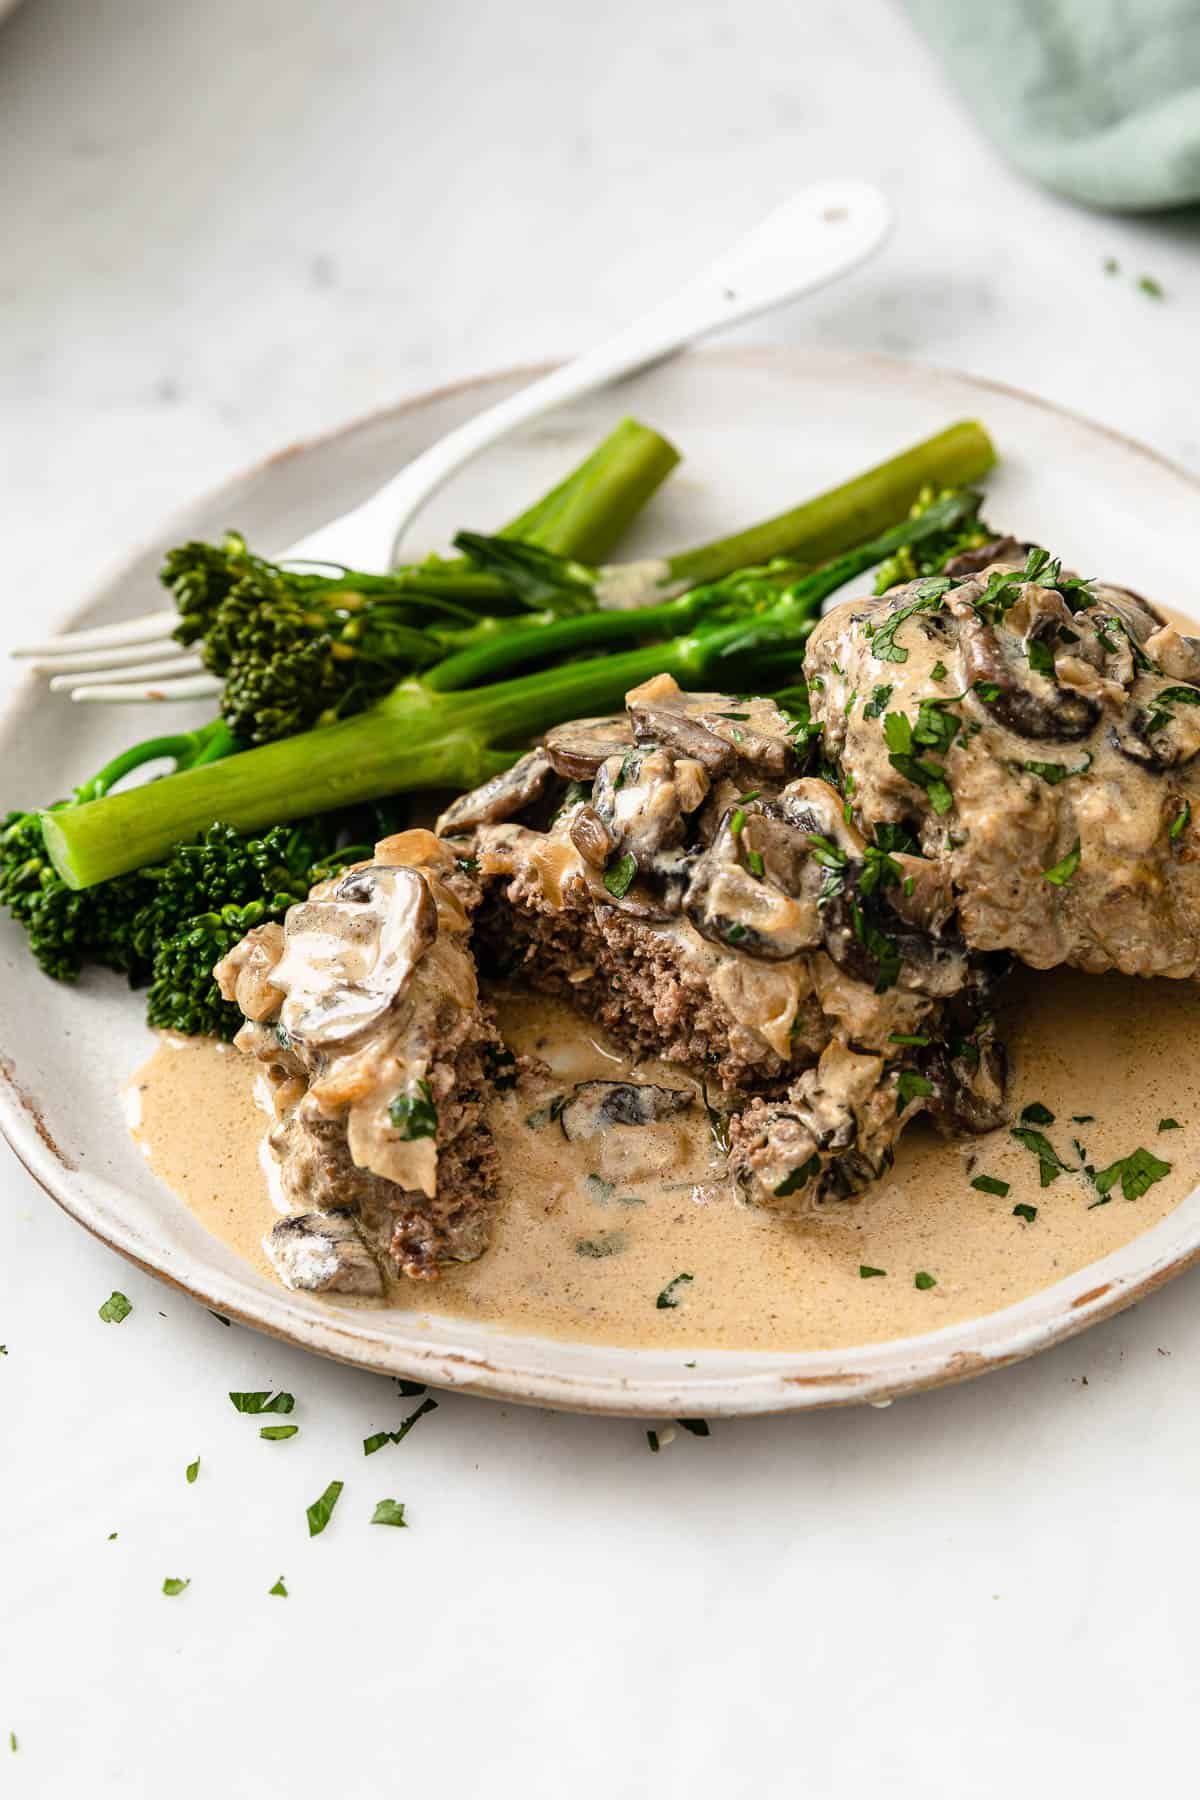 beef stroganoff burgers on a white ceramic plate, served with broccoli